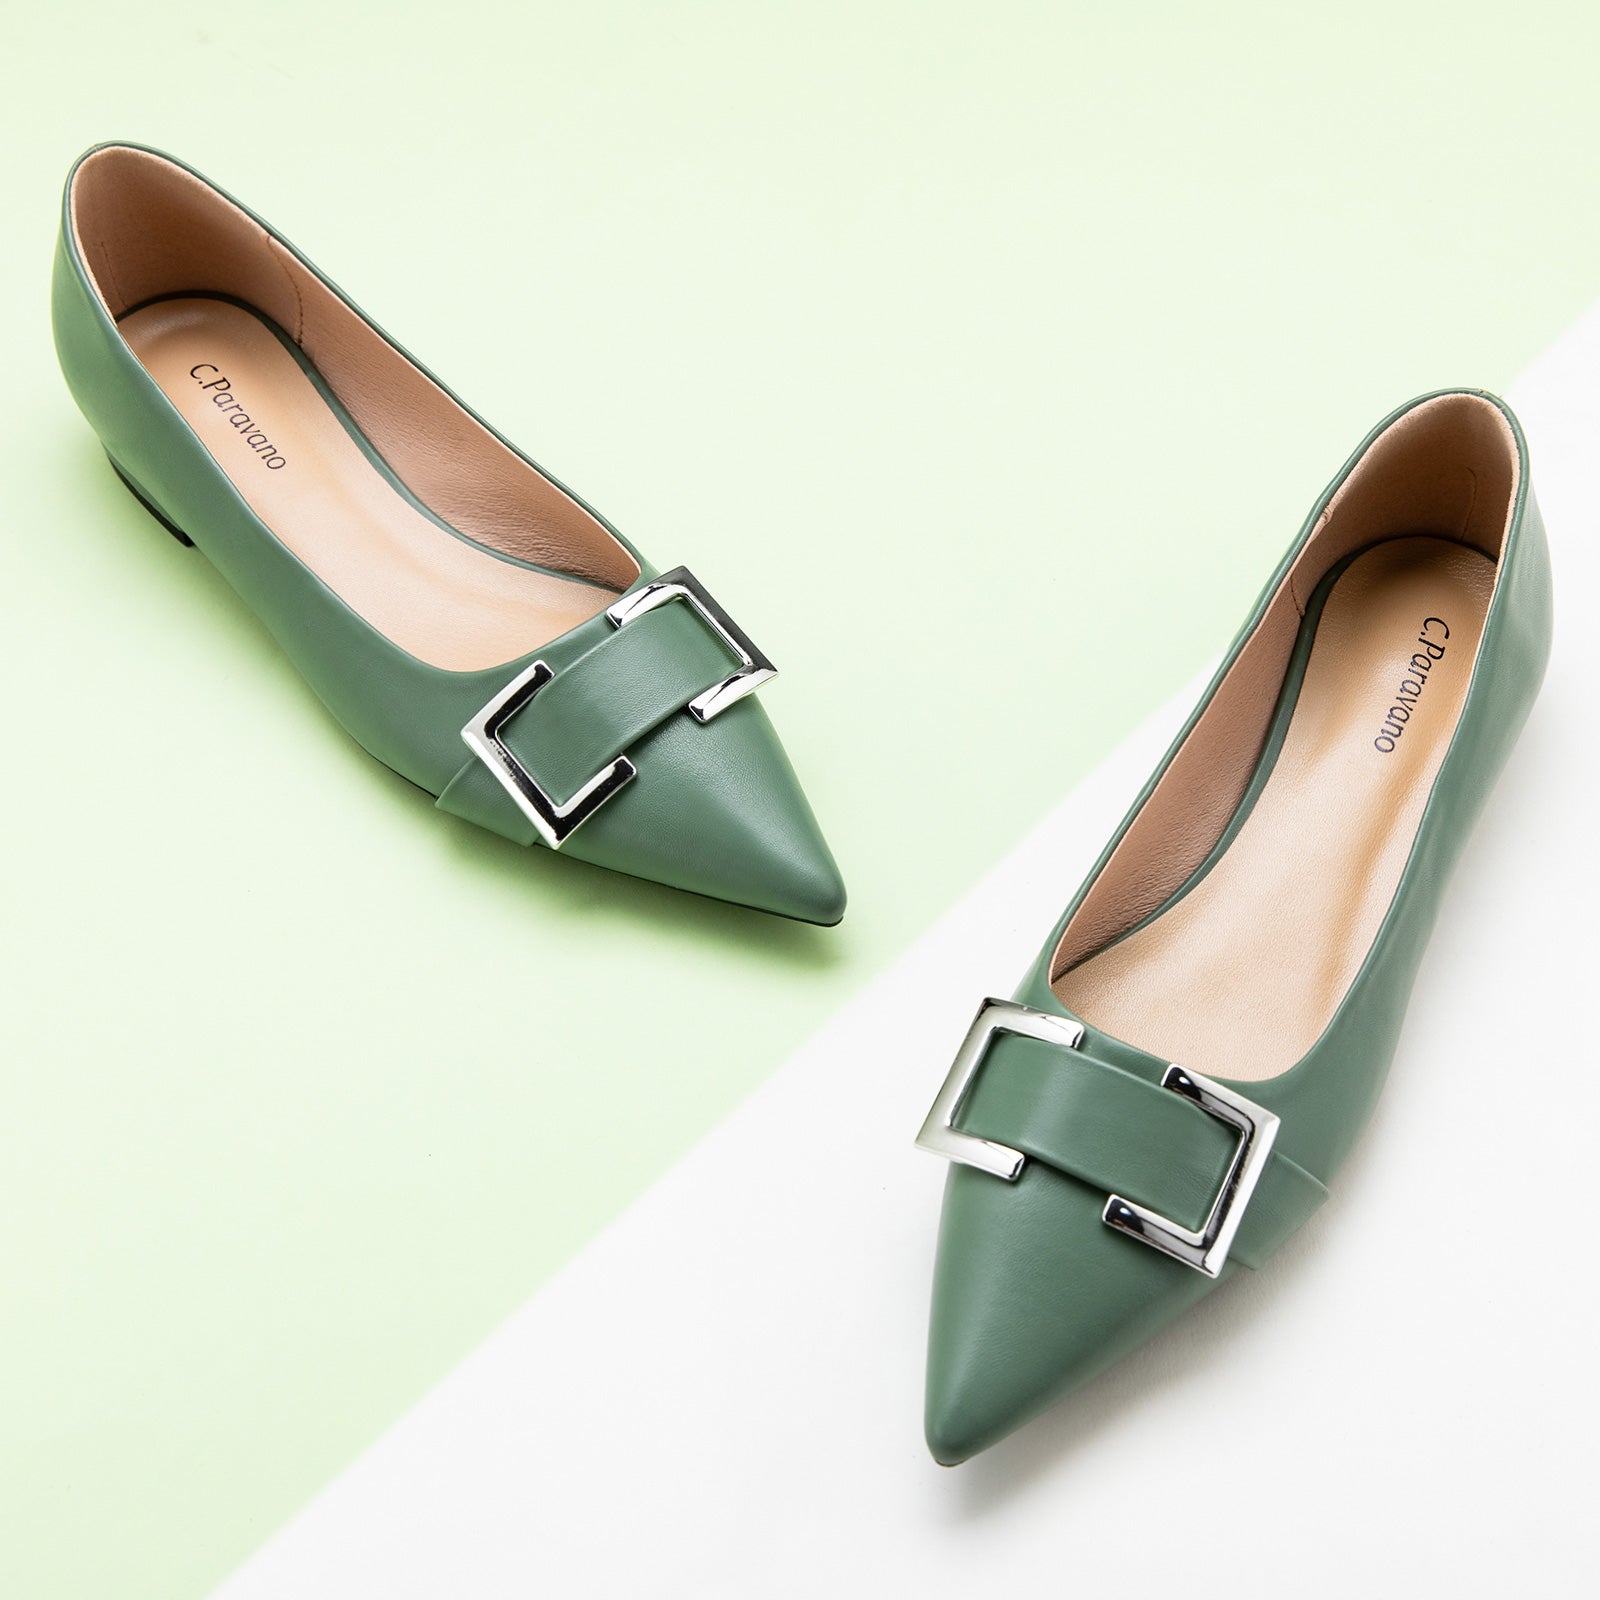 Emerald Green Elegance: Green Soft Leather Flats with a Metal Buckle and Pointed Toe, a vibrant and eye-catching choice for adding a pop of color to your ensemble